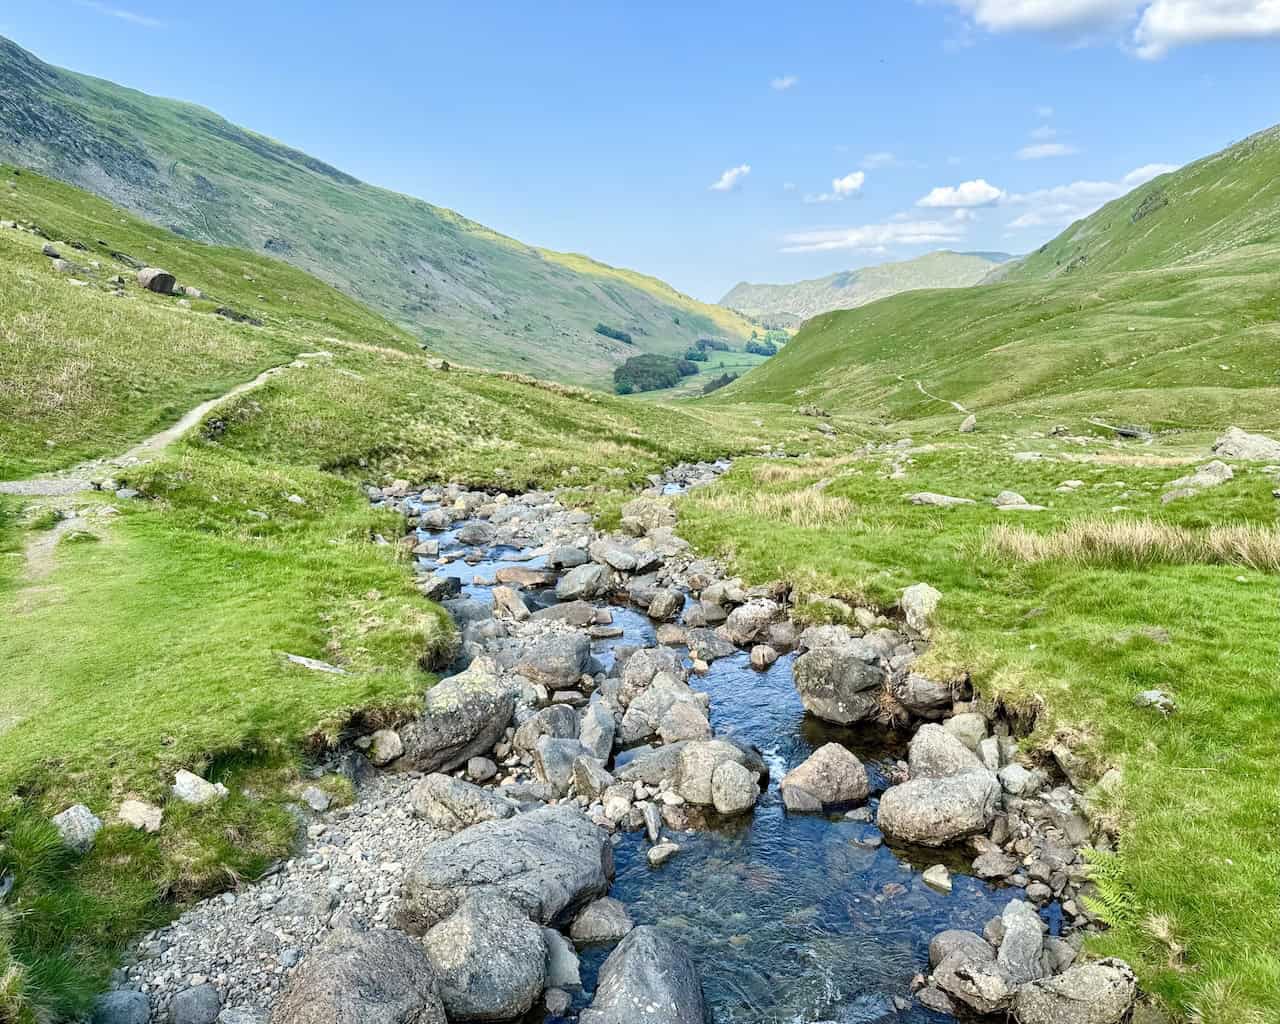 Crossing a stream sourced high up on the east-facing slopes of High Crag is a refreshing experience, adding to the adventure.